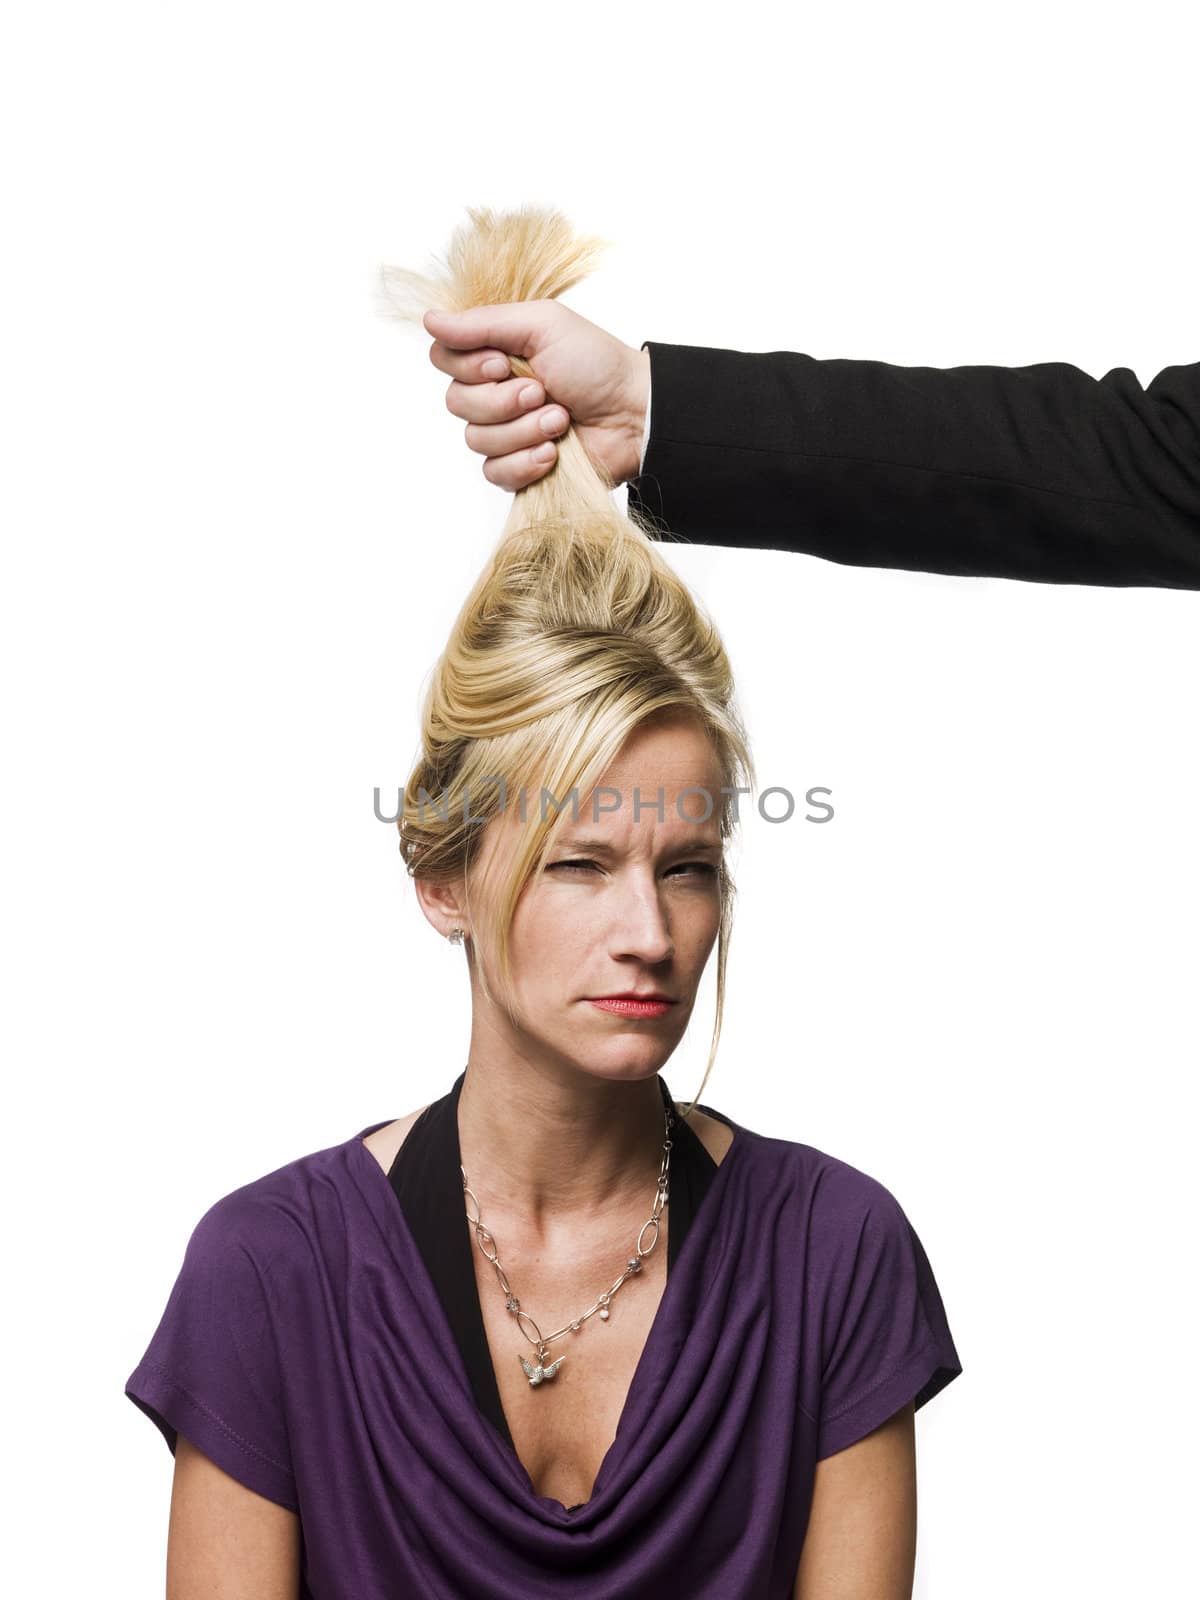 man pulling a woman in the hair by gemenacom